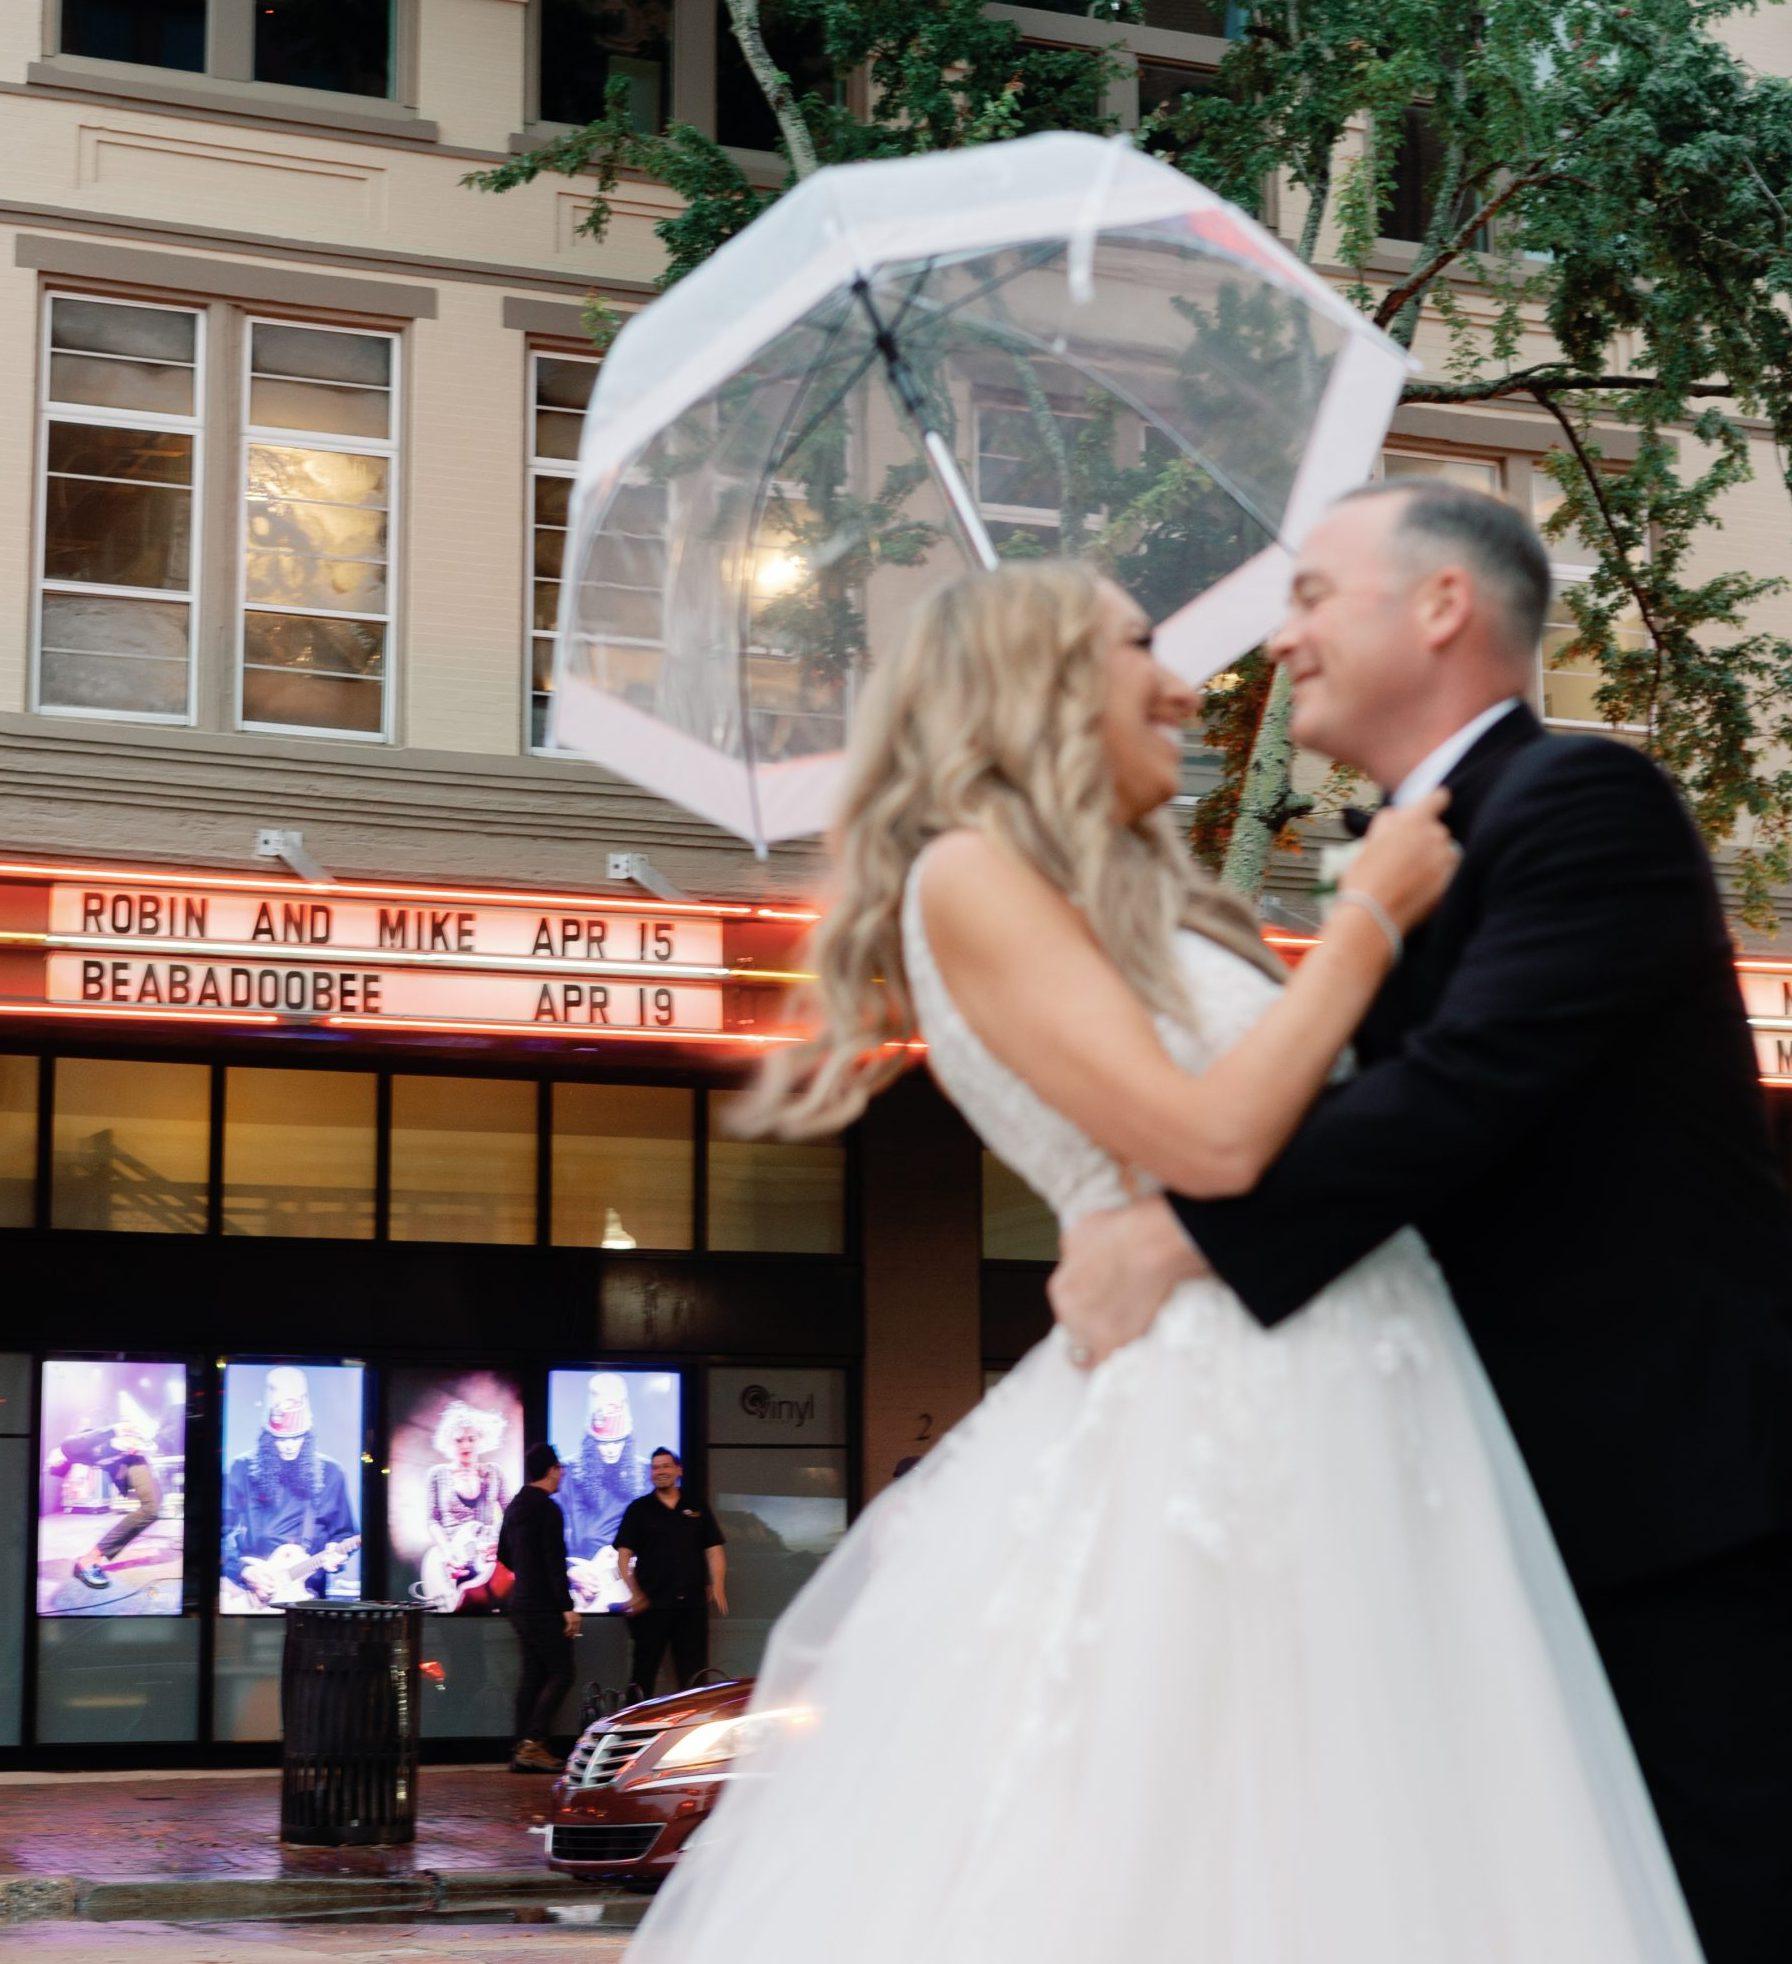 Bride Robin and Groom Mike look lovingly at one another on their wedding day under an umbrella in front of Vinyl Music Hall in Pensacola.